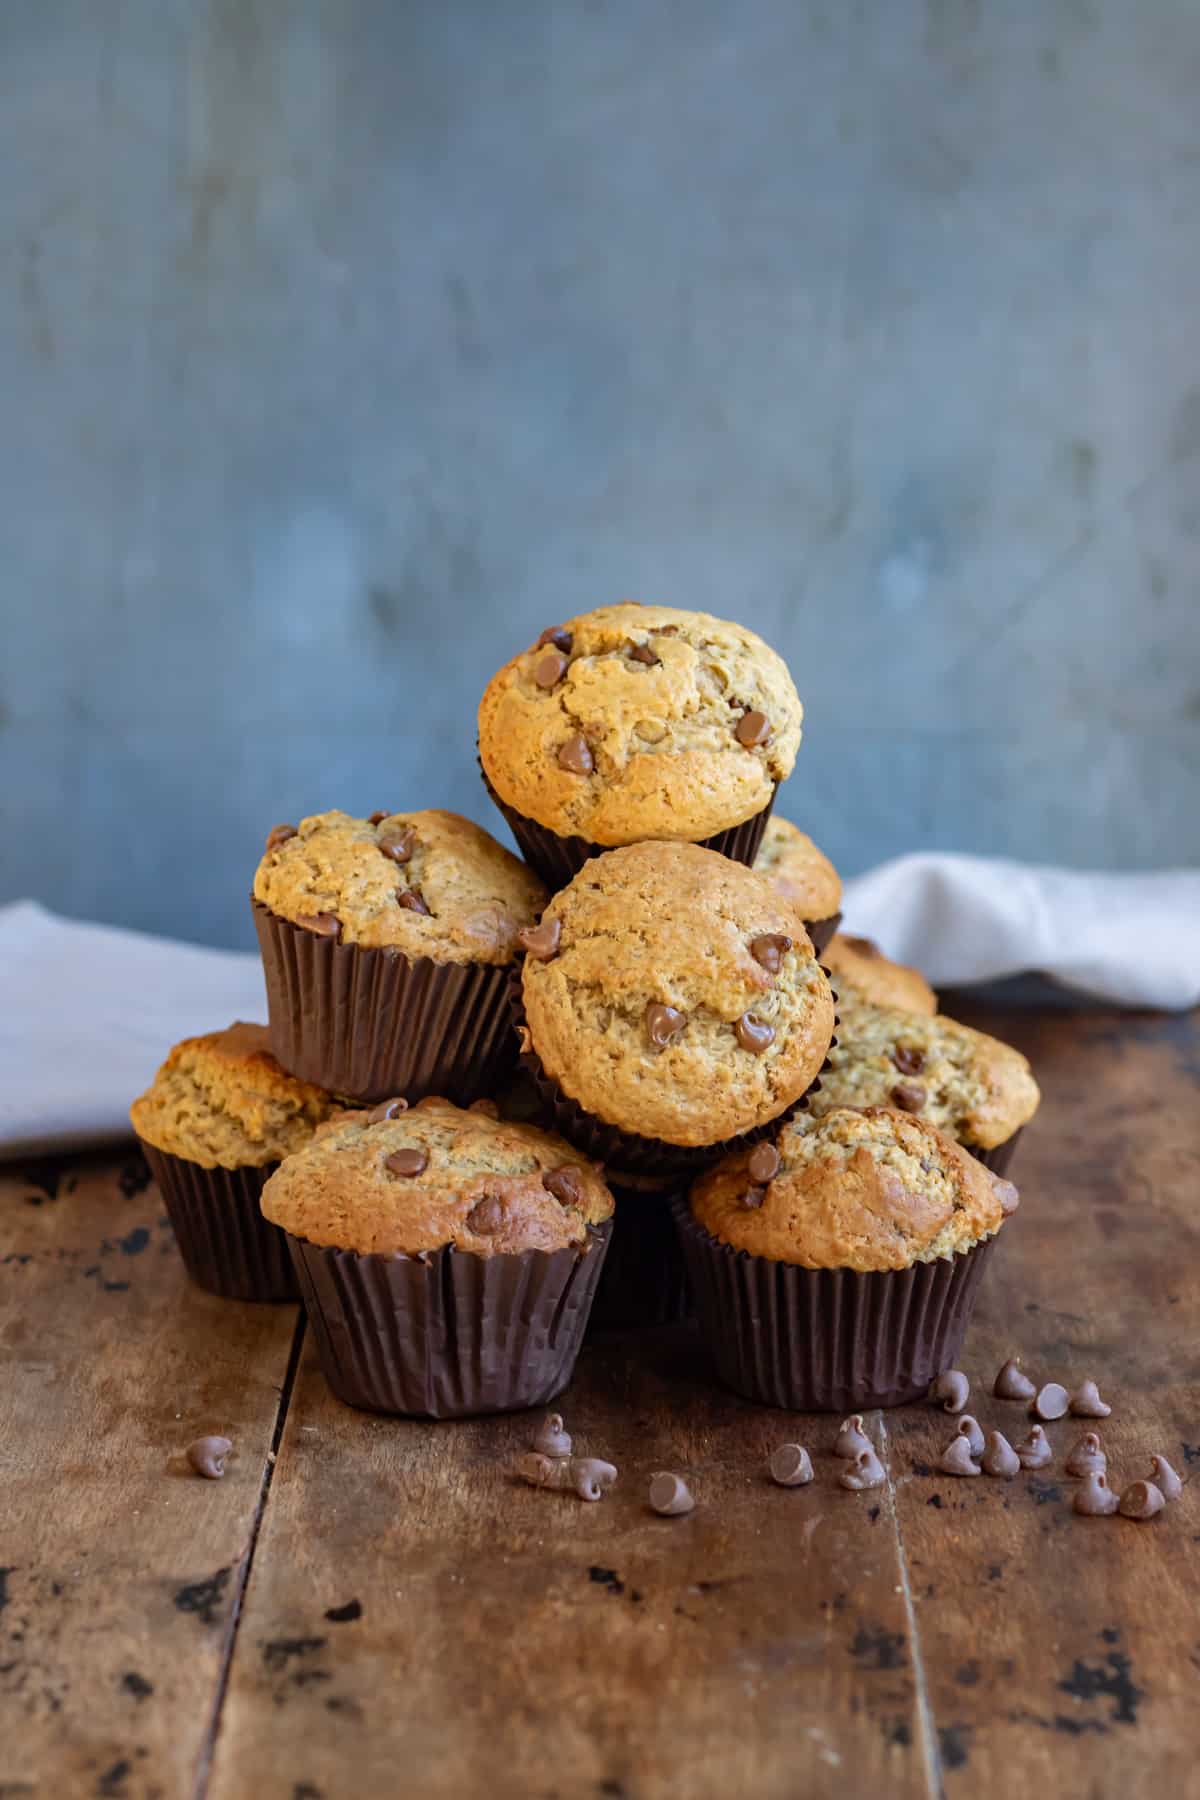 Pile of chocolate chip peanut butter muffins on a wooden table.